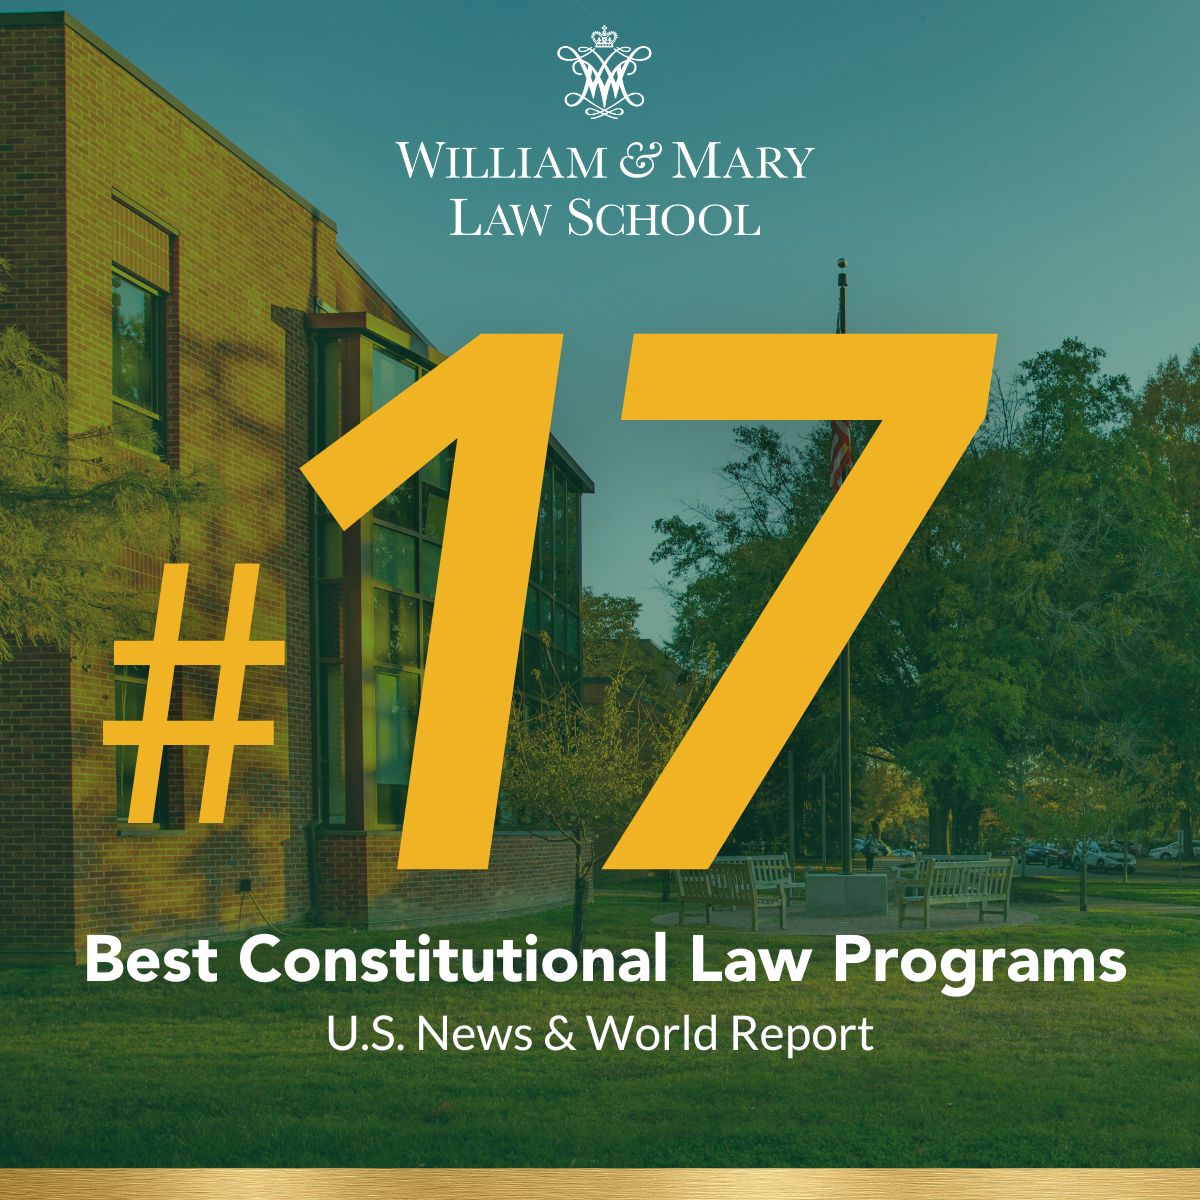 We're pleased to share that our Constitutional Law Program has been ranked #17 in the nation by U.S. News & World Report. This recognition highlights our commitment to providing top-tier education and opportunities in this vital legal field. #WMlaw law.wm.edu/about/rankings